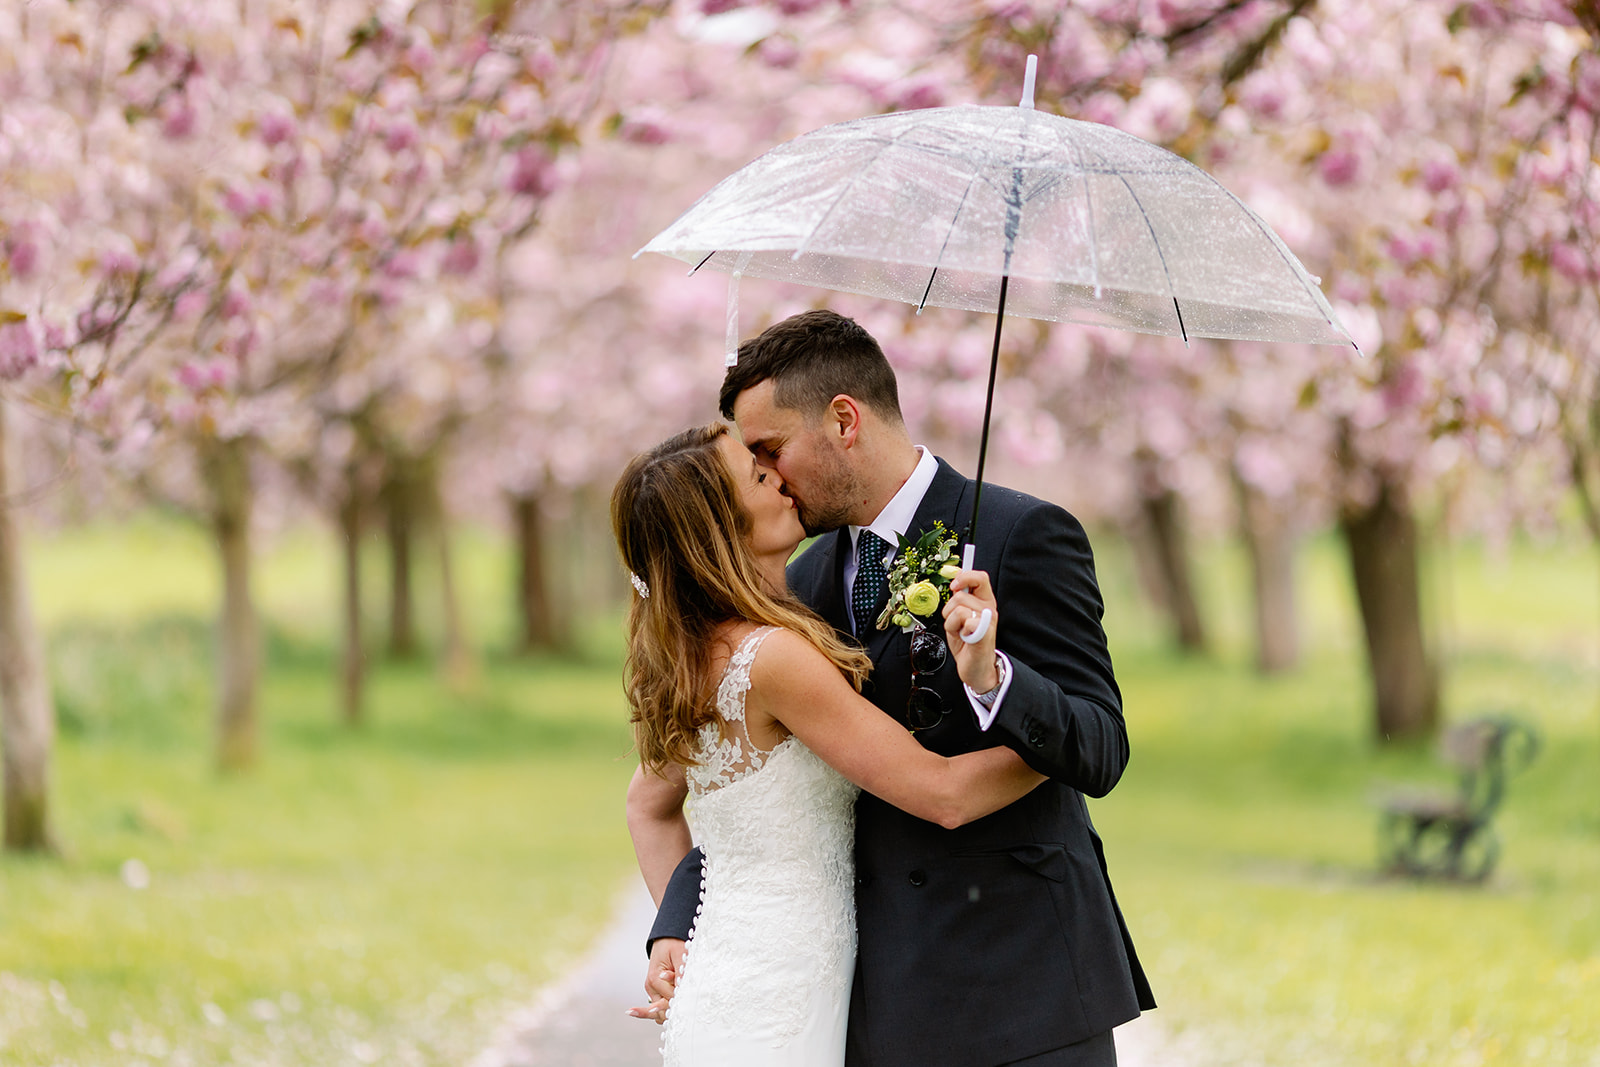 A newly married wedding couple kissing under Cherry Blossoms